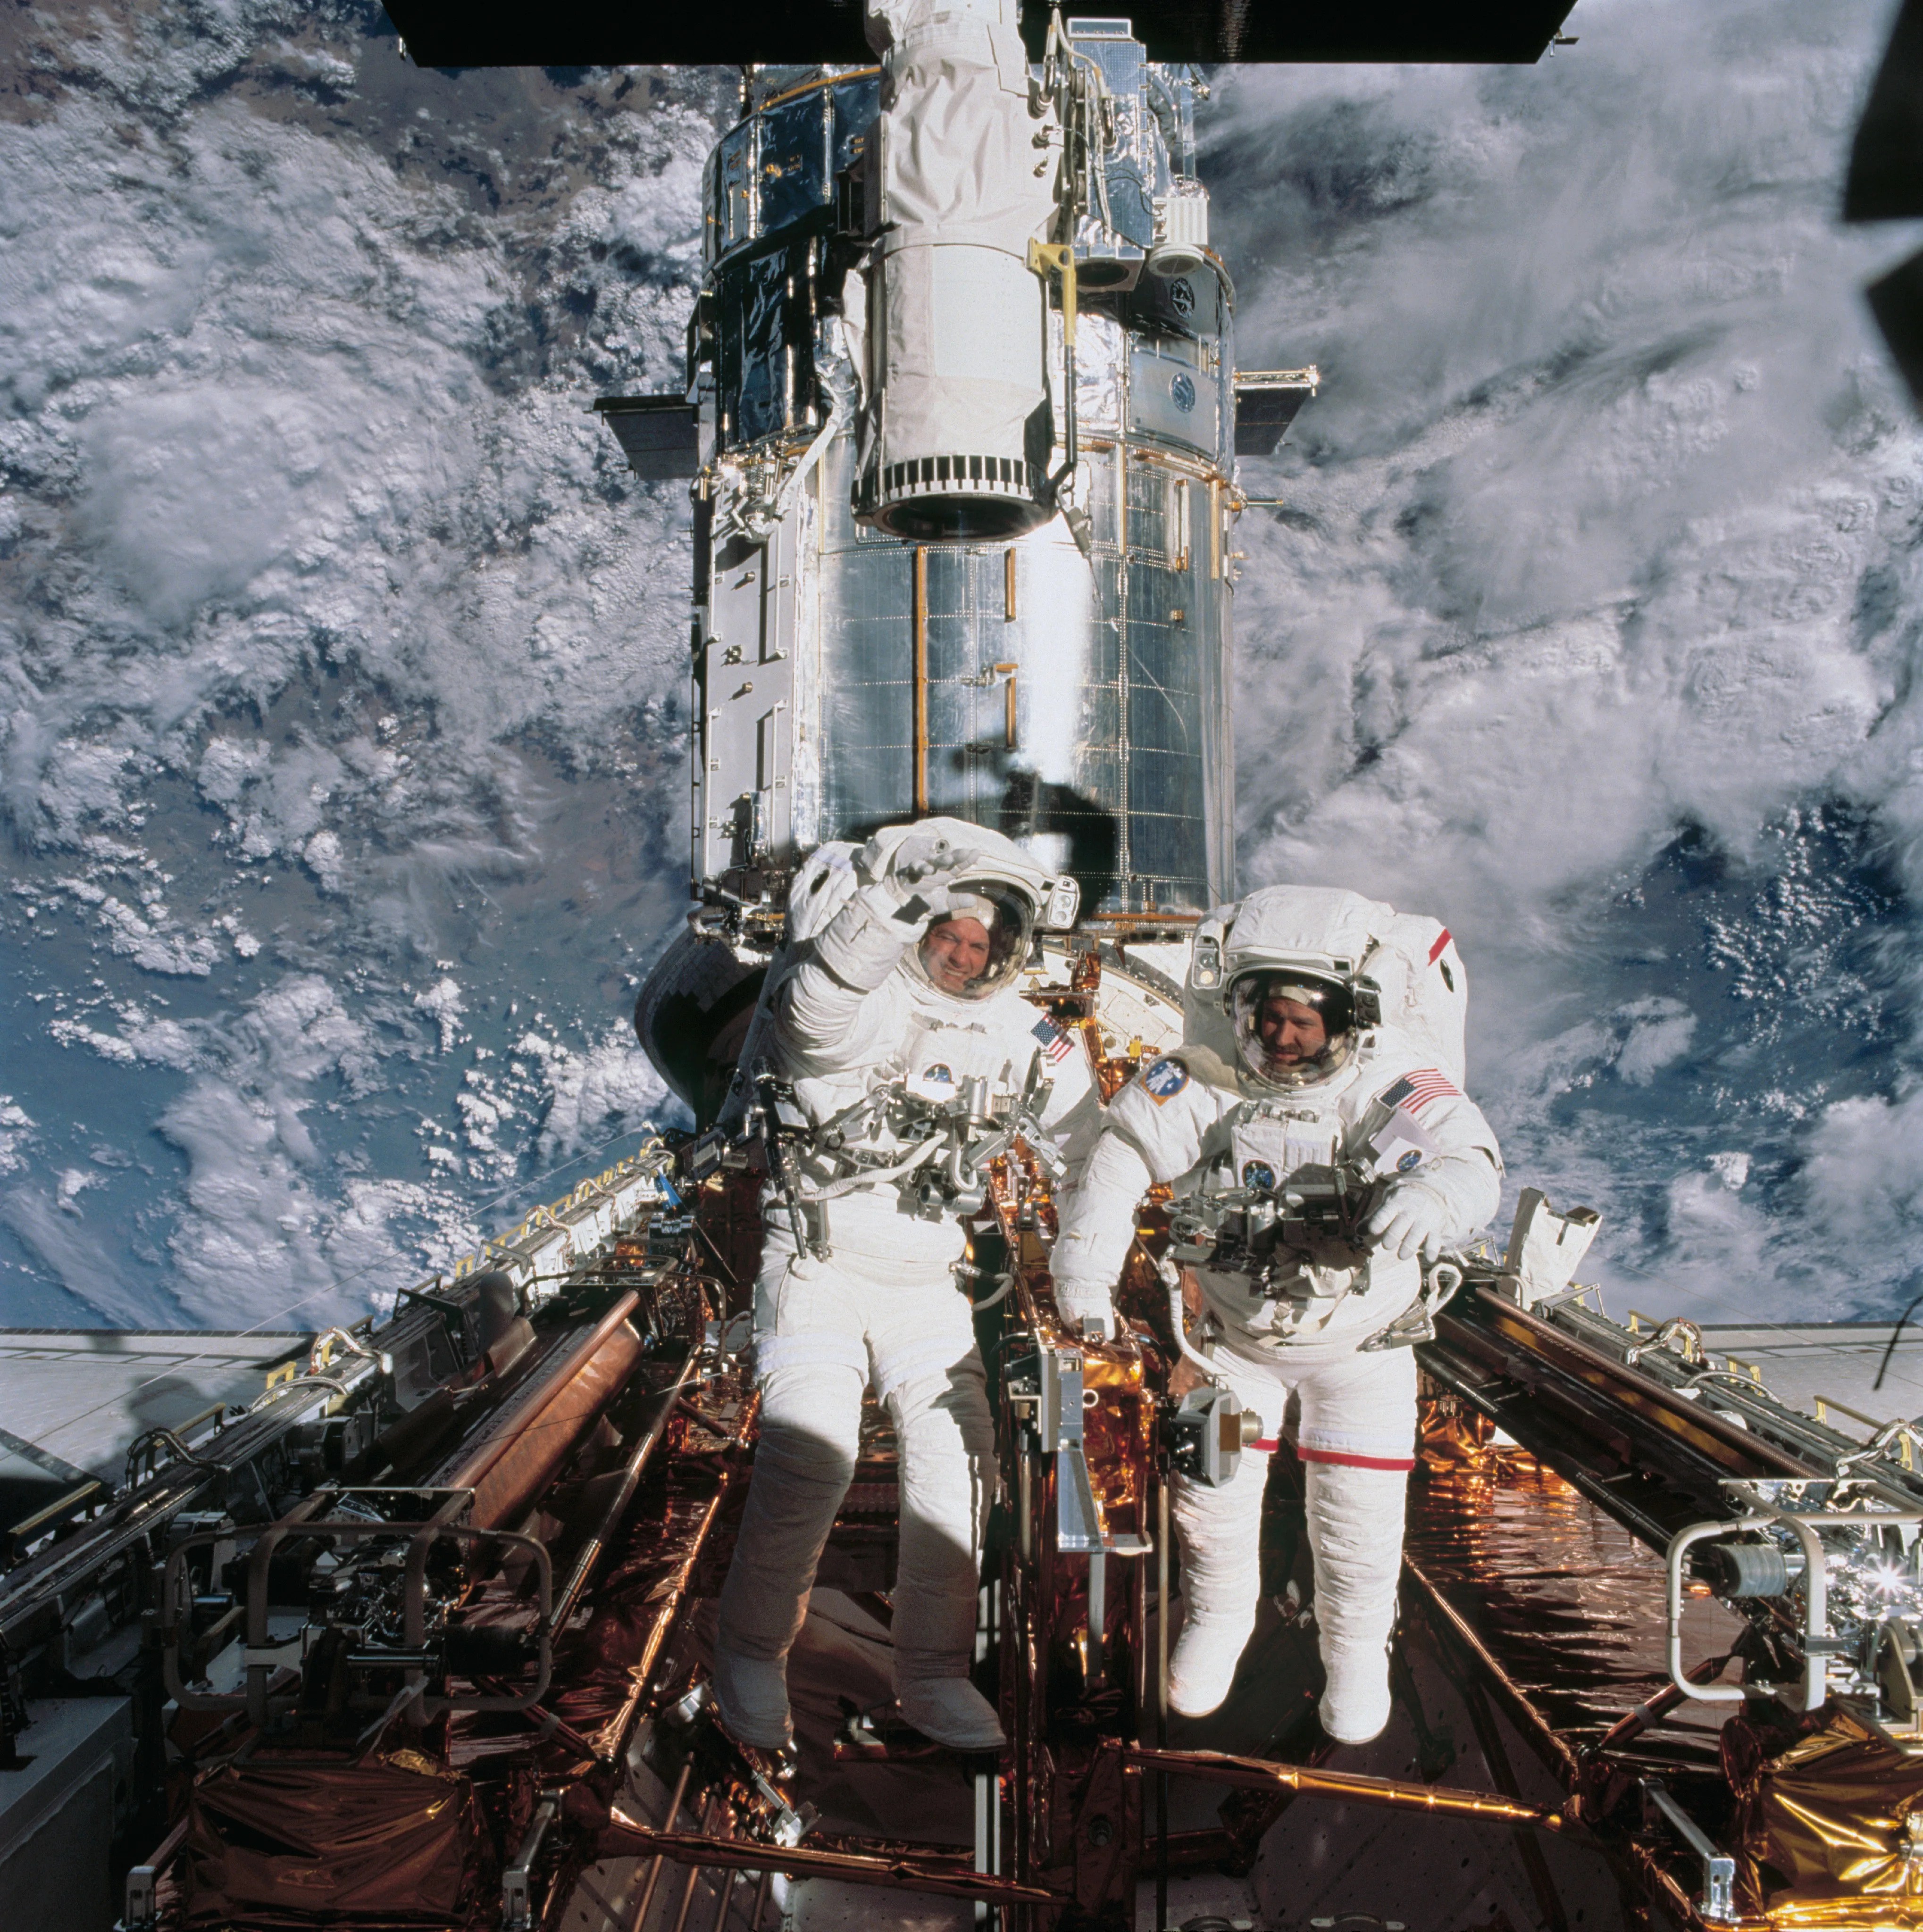 Two astronauts stand in a space shuttle cargo bay with Hubble behind them. The Earth, as seen from above in space, is in the background.